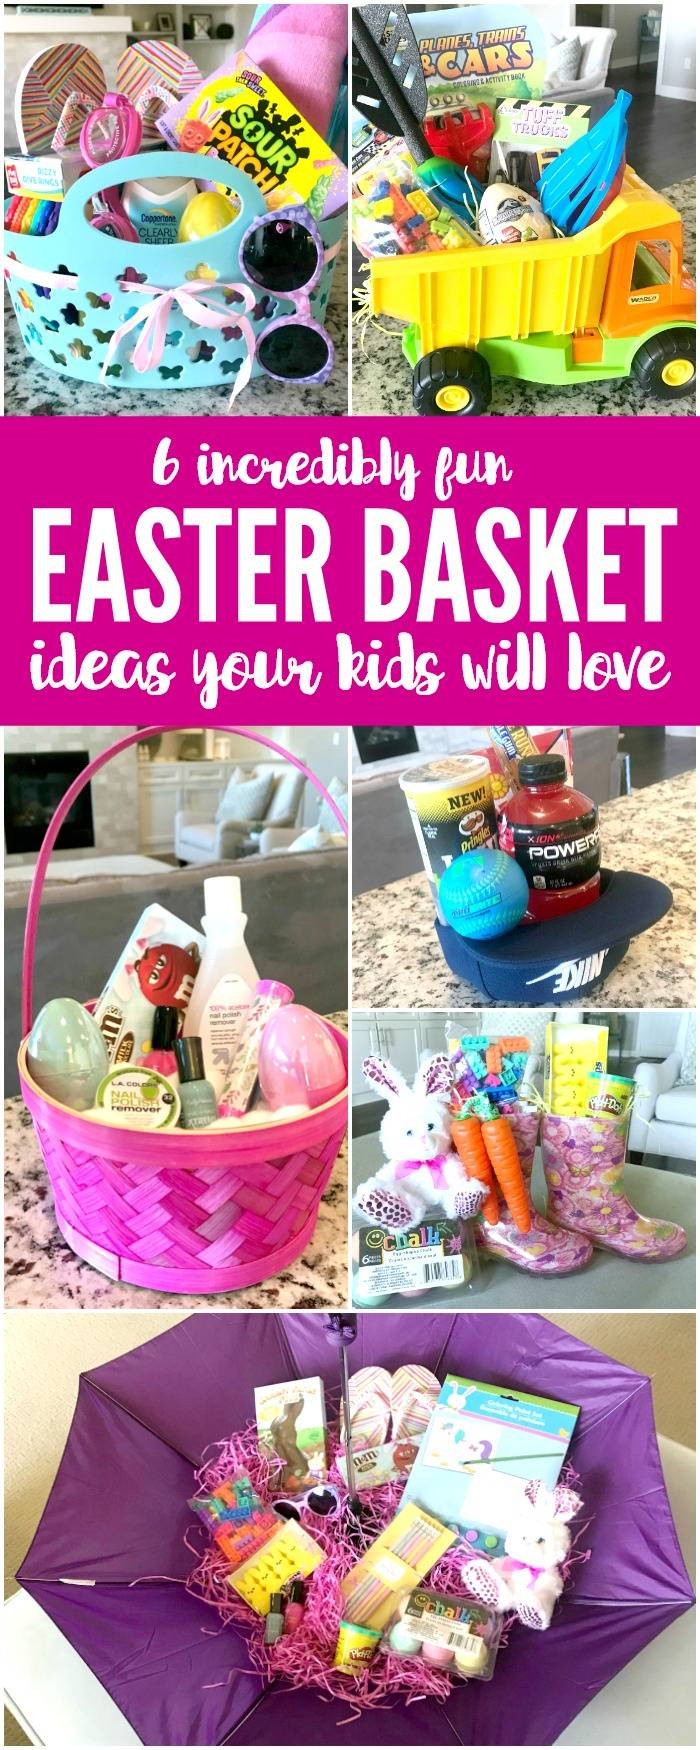 Fun Easter Basket Ideas
 6 Amazing Easter Basket Ideas to Try This Year Passion